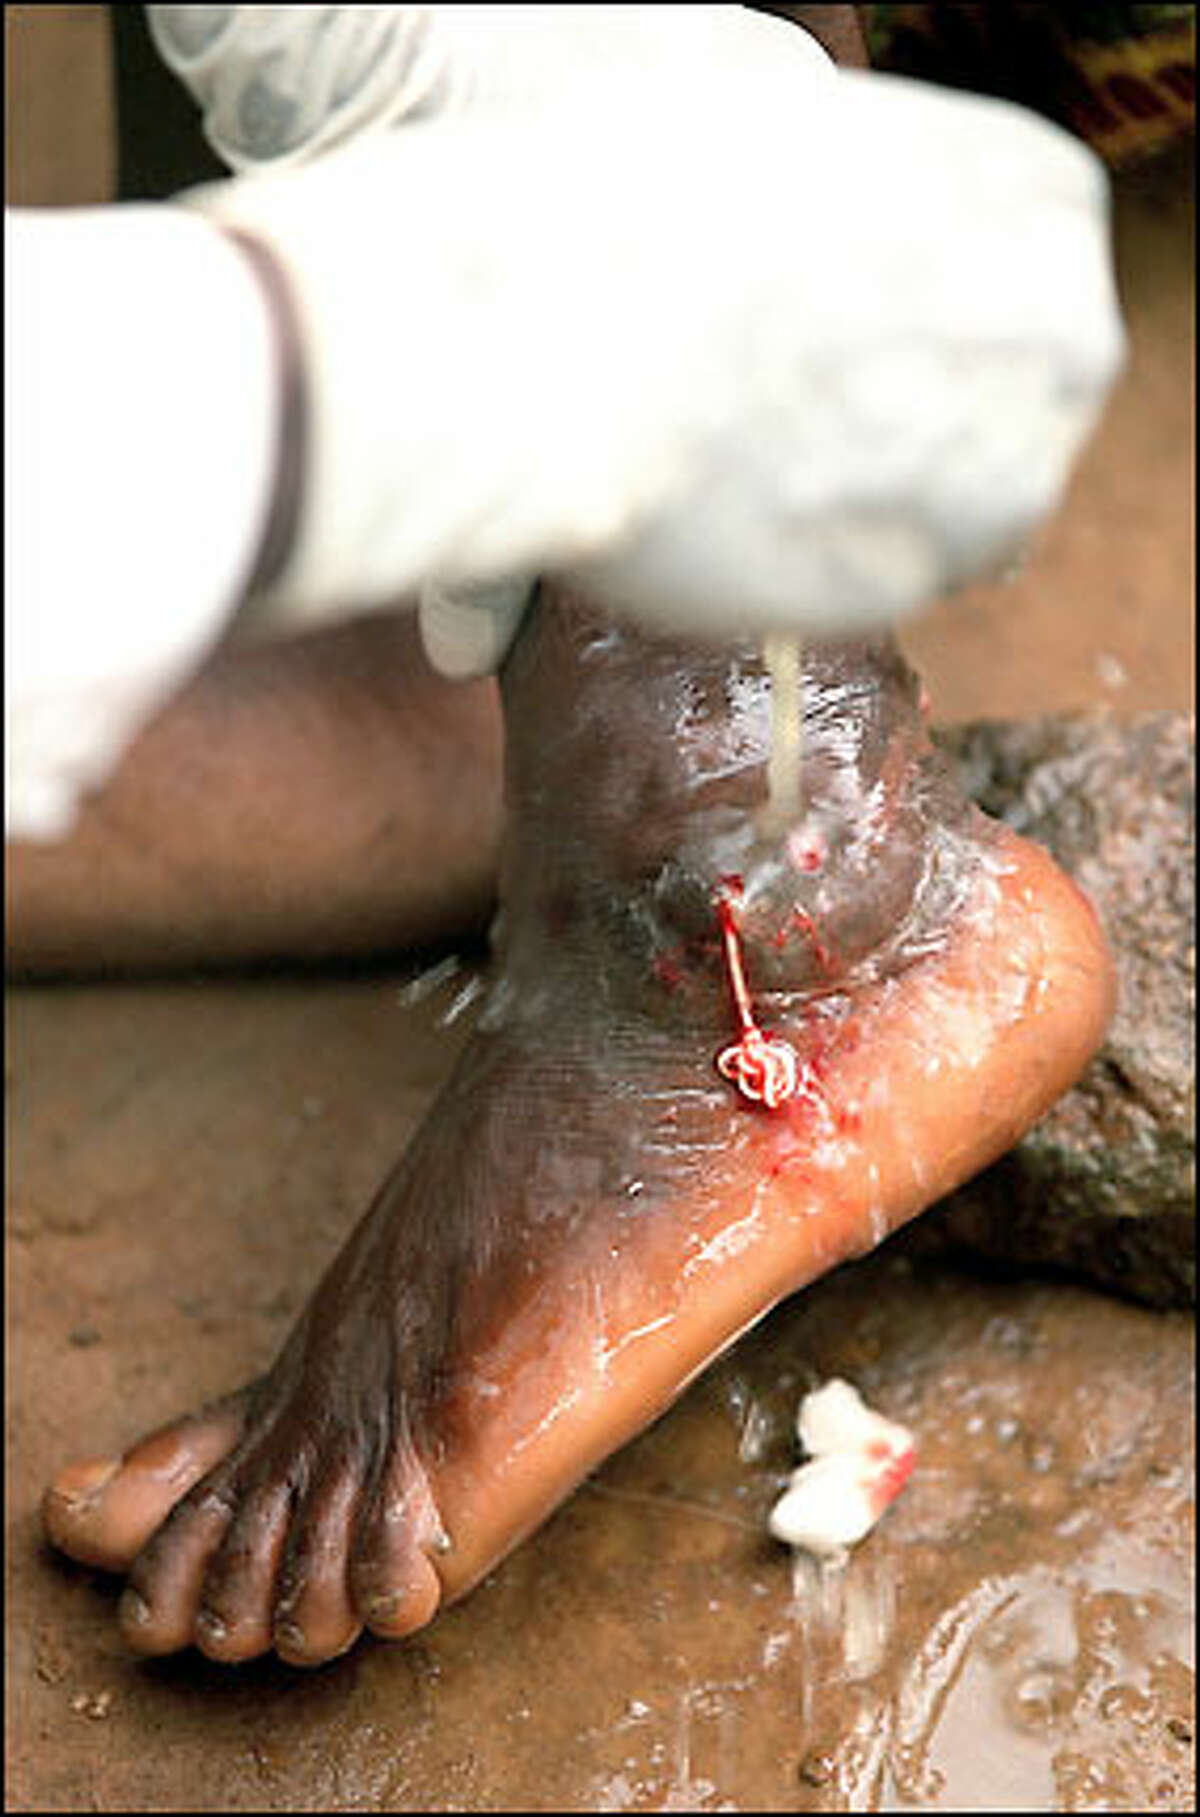 The guinea worm -- this one strangely knotted -- is coaxed from Malik's ankle during a procedure performed in public. Villagers often make a party out of the worm extractions to get people to attend and learn how to protect themselves.